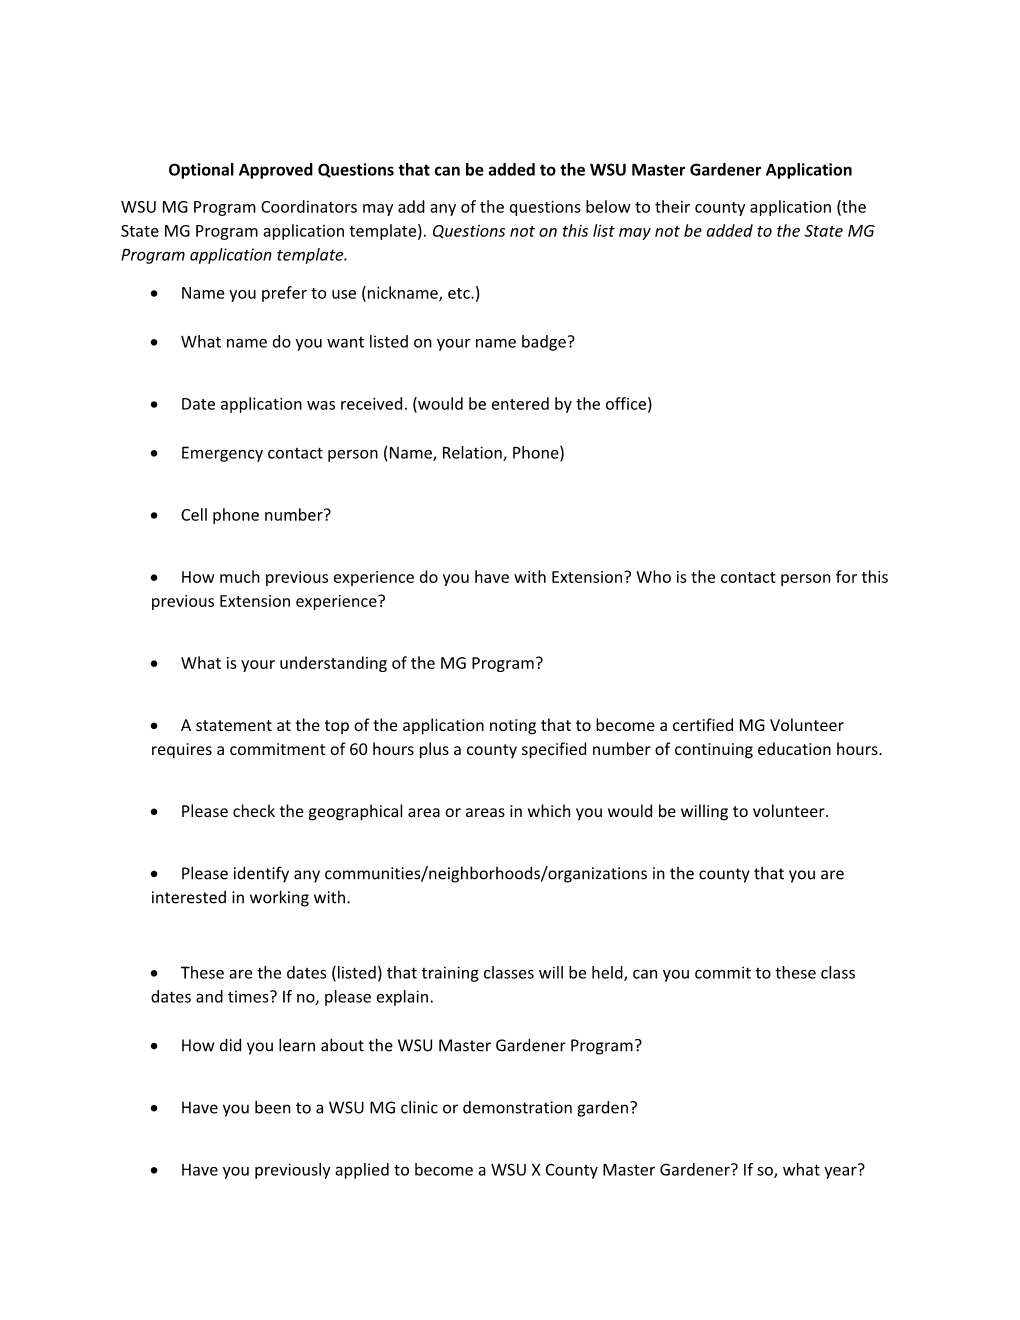 Optional Approved Questions That Can Be Added to Thewsu Master Gardener Application